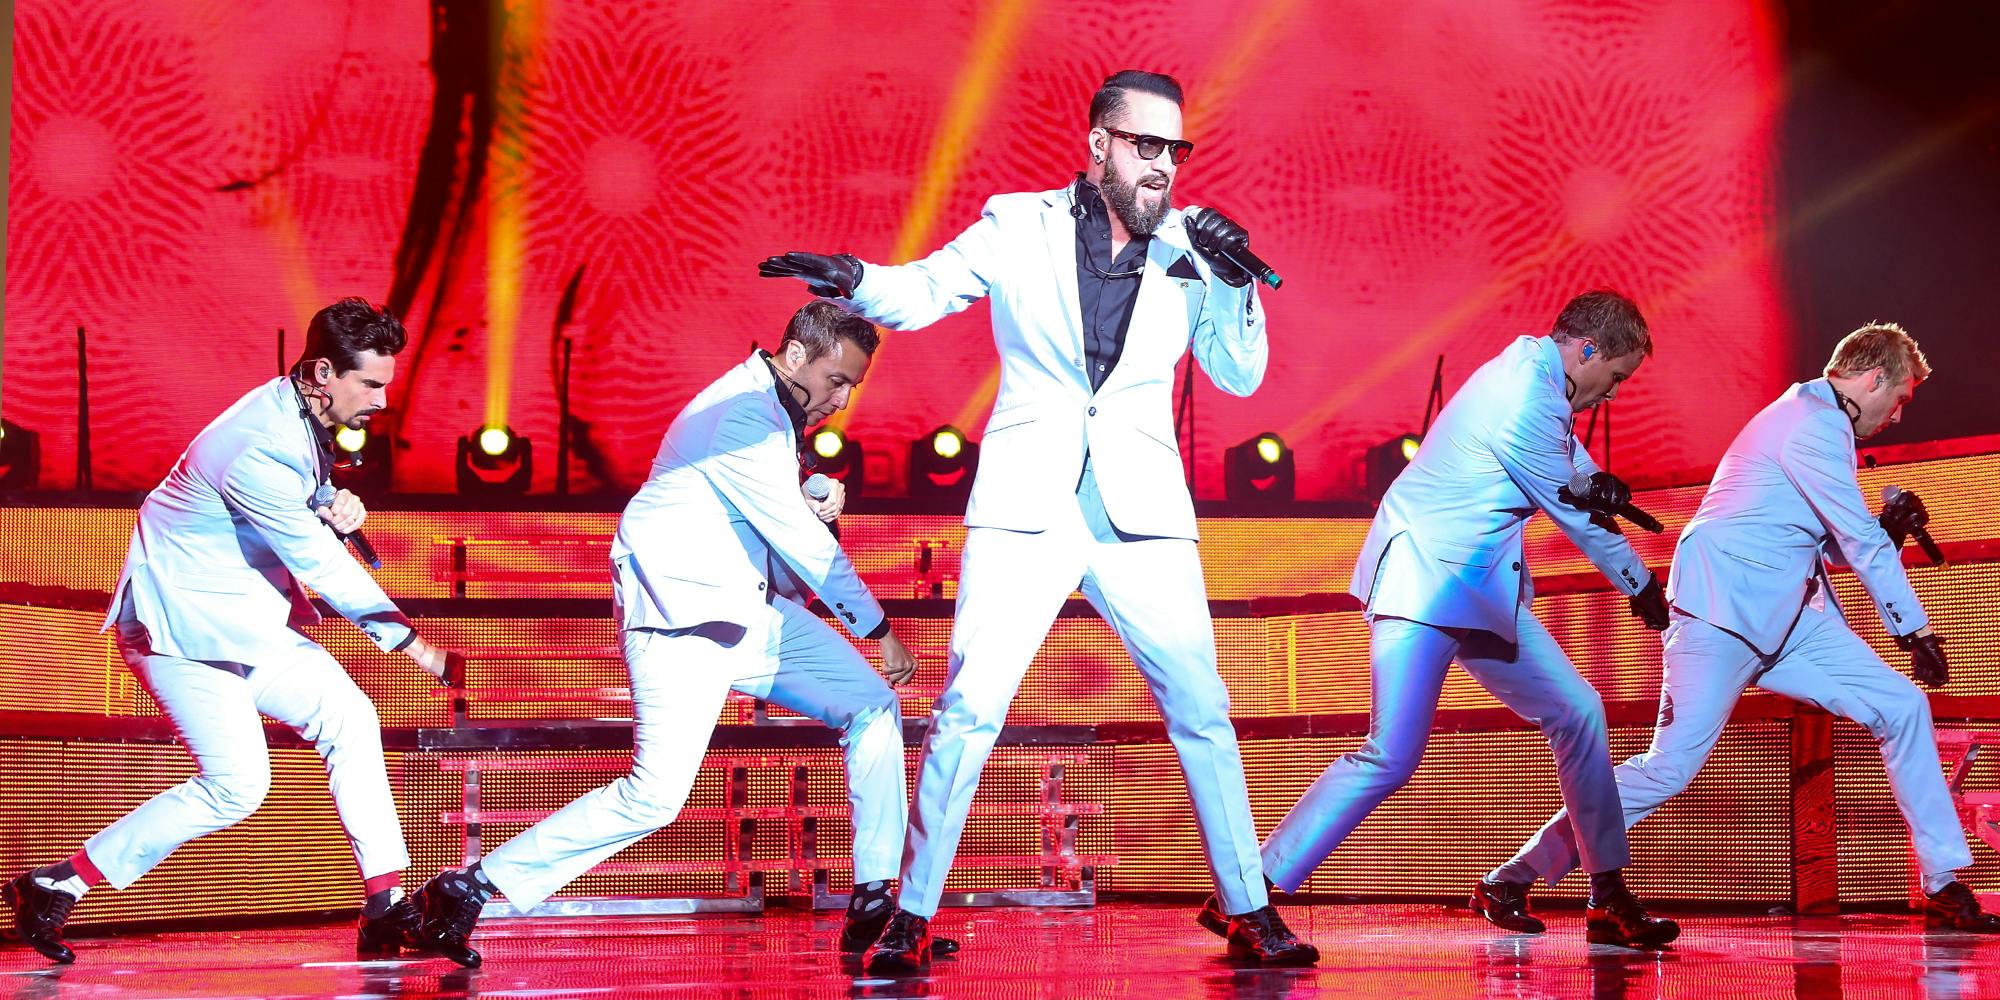 The Backstreet Boys live in concert on their 20th anniversary and In A World Like This Tour on August 20, 2013 in Raleigh, NC.